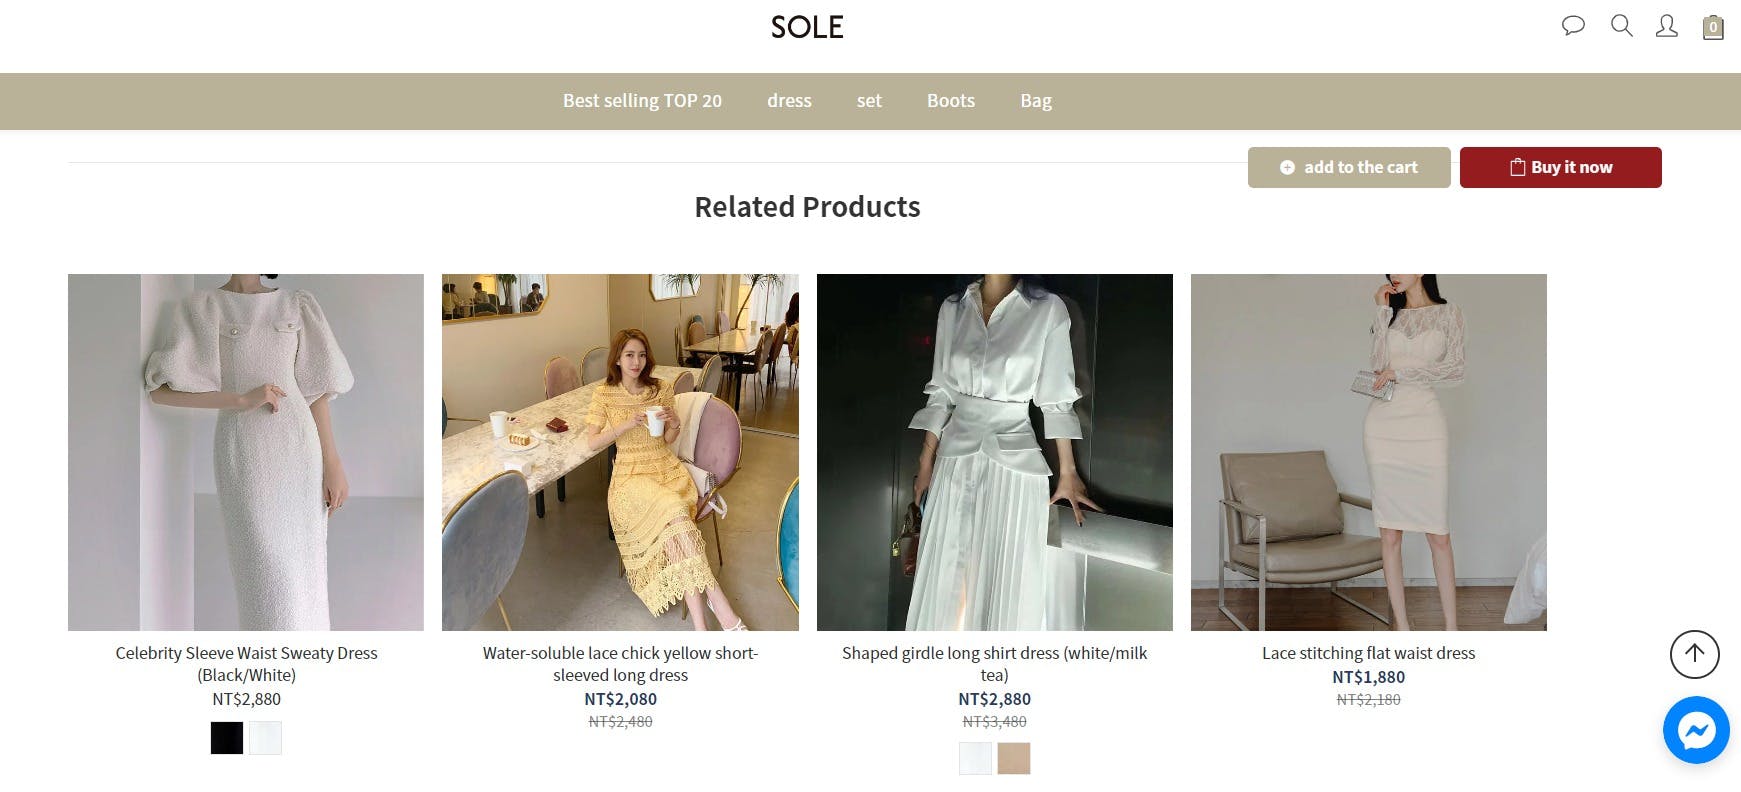 SOLE uses personalized recommendation 